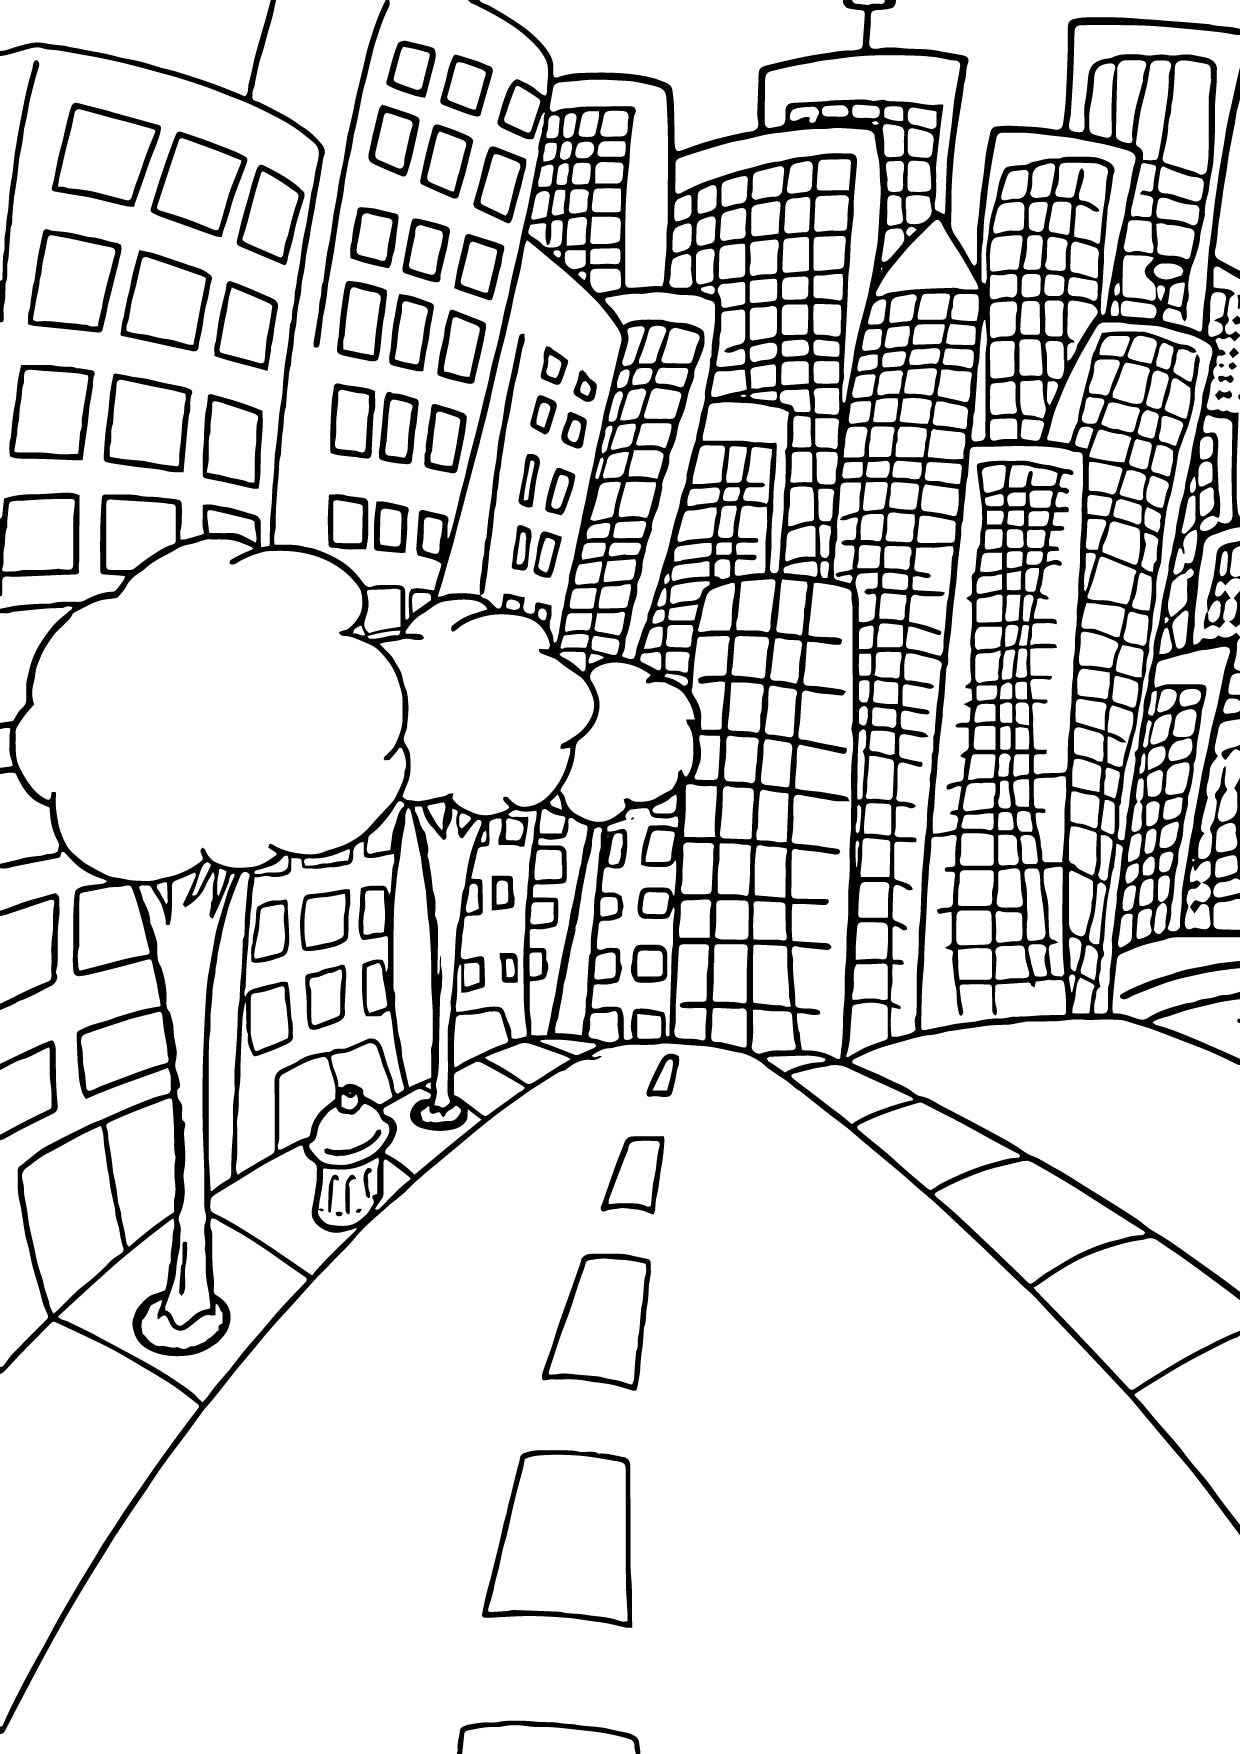 Cityscape Coloring Page at Free printable colorings